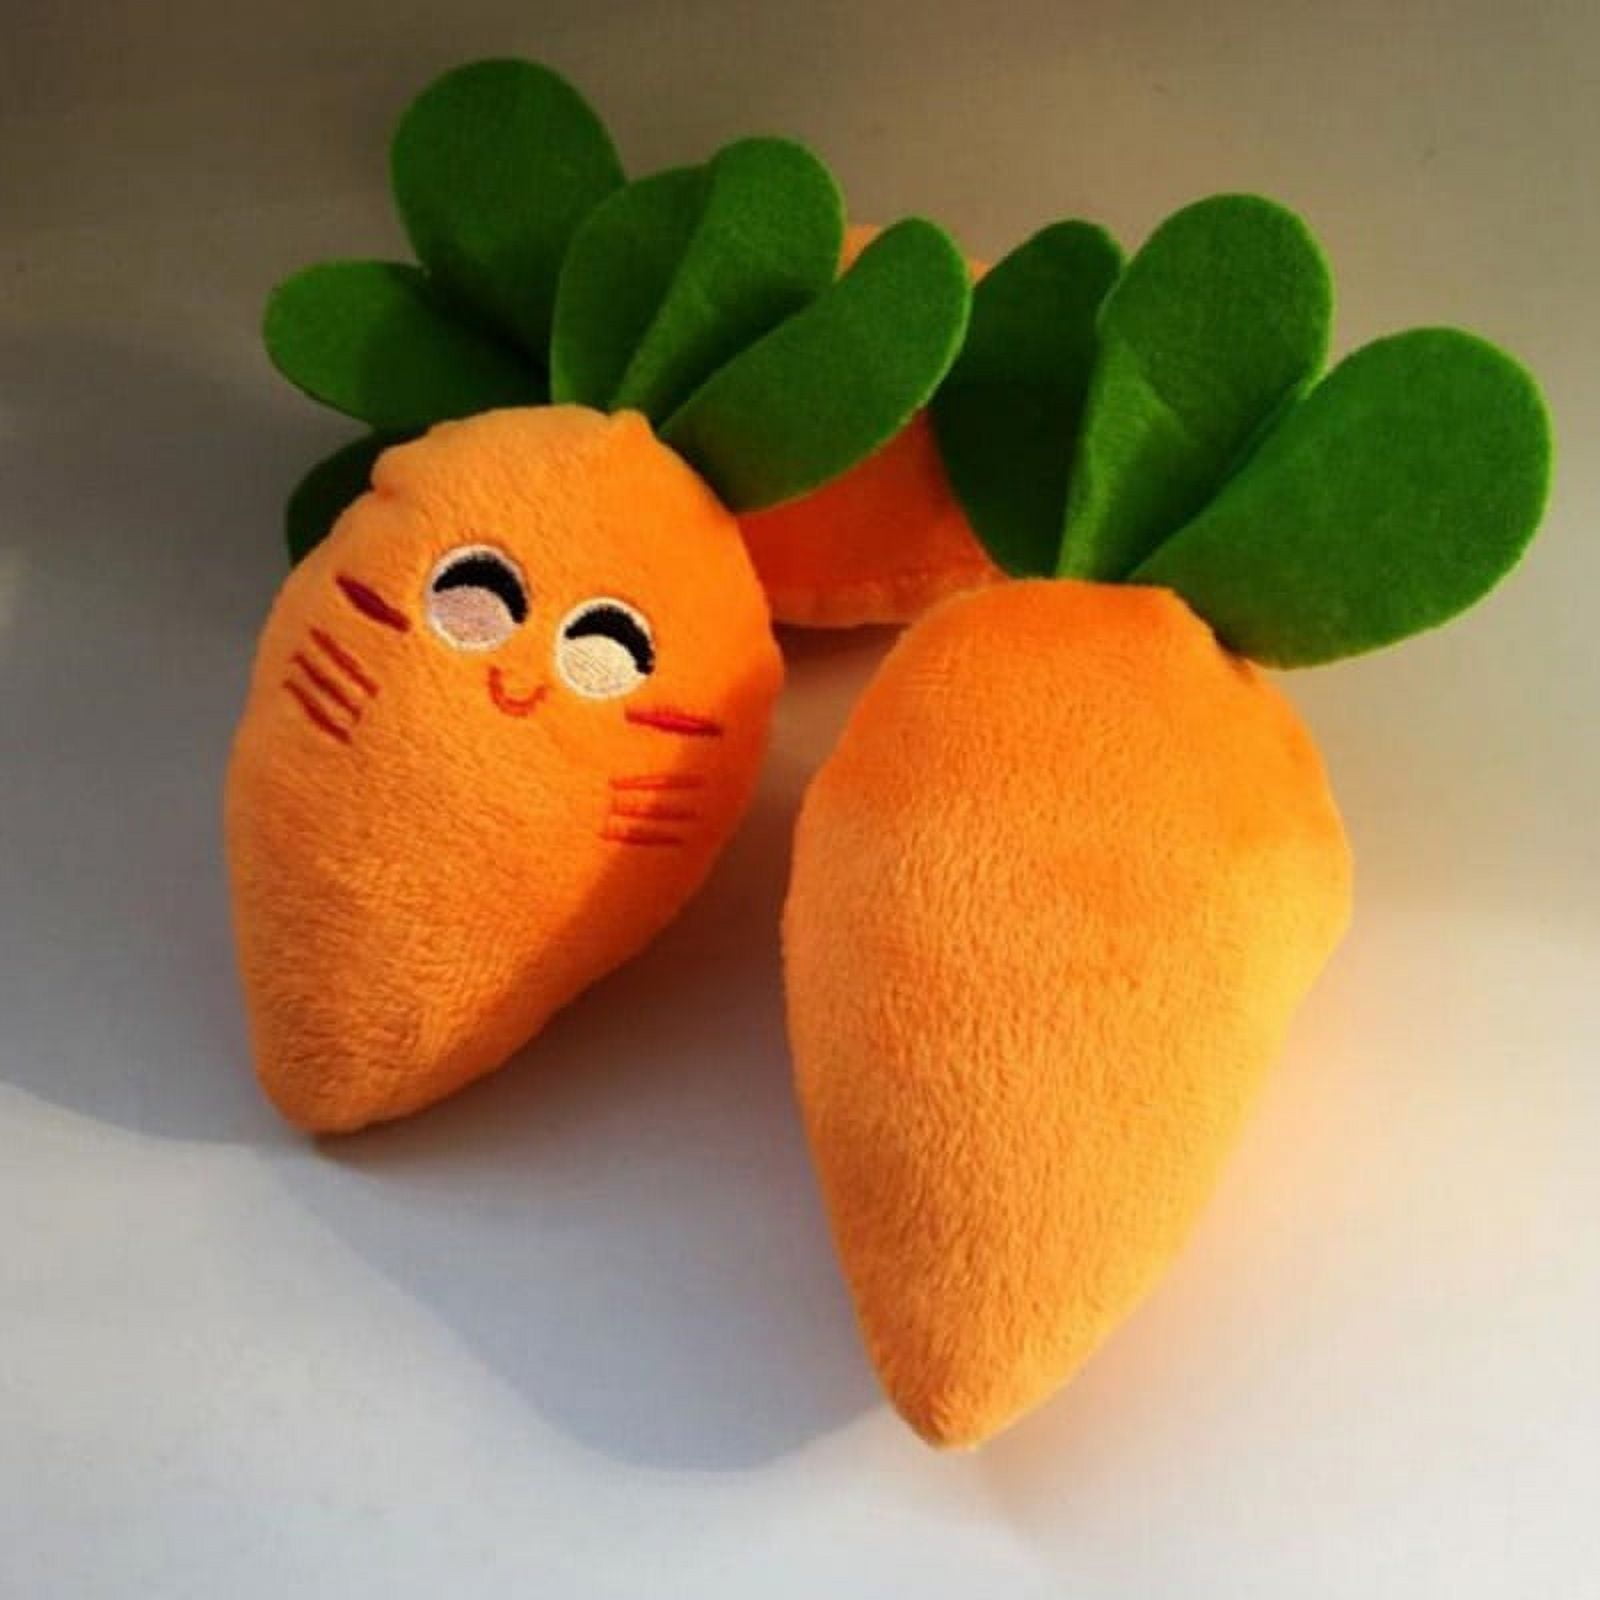 Zoobilee Carrot Shaped Plush Small Dog & Puppy Toy